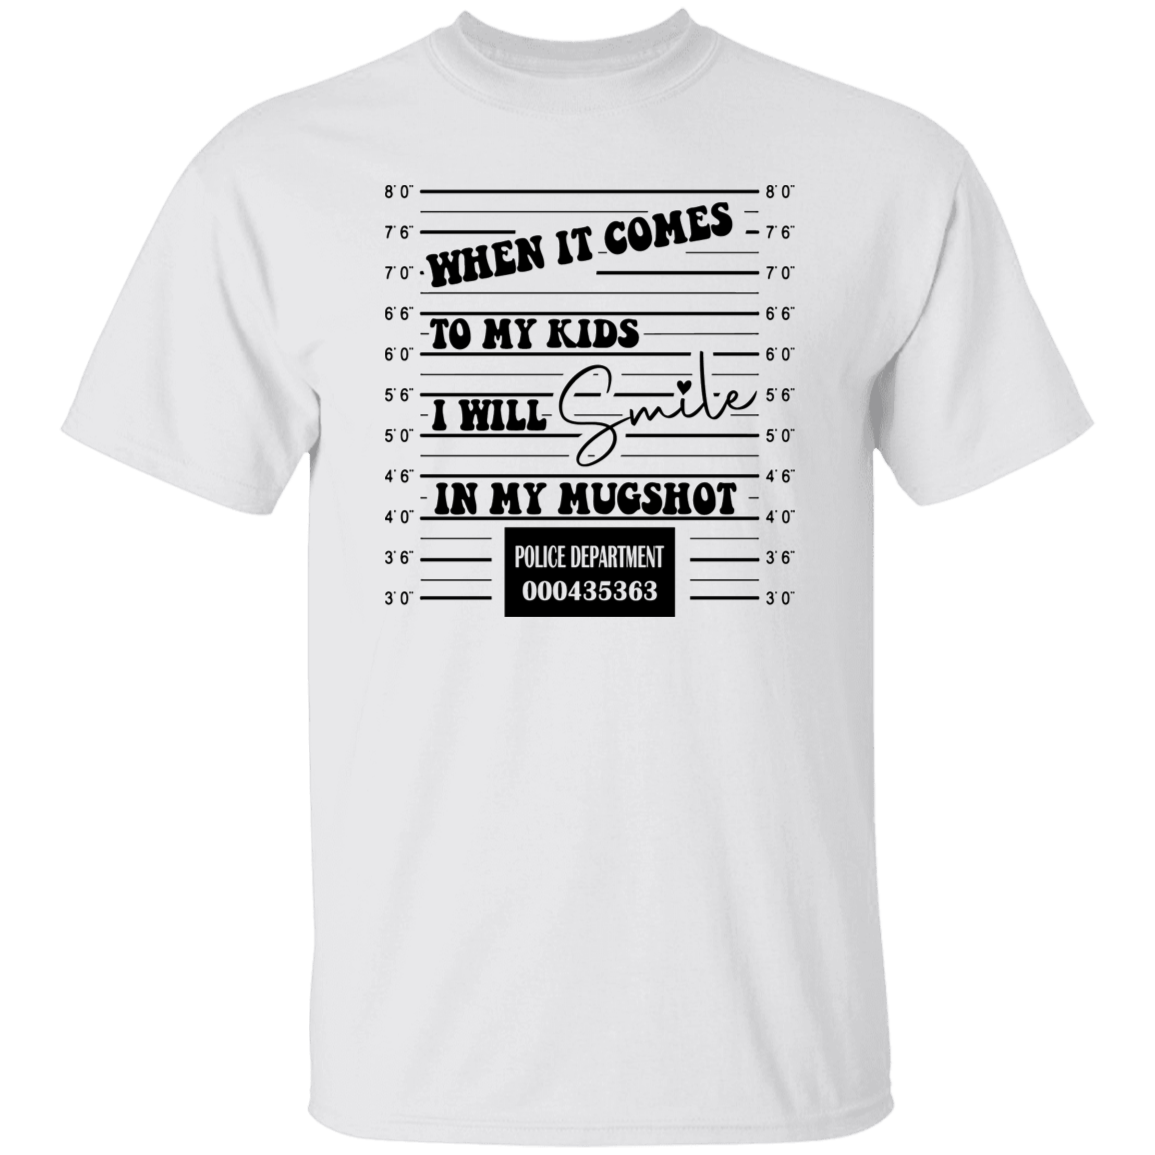 When it comes to my Kids...T-Shirt